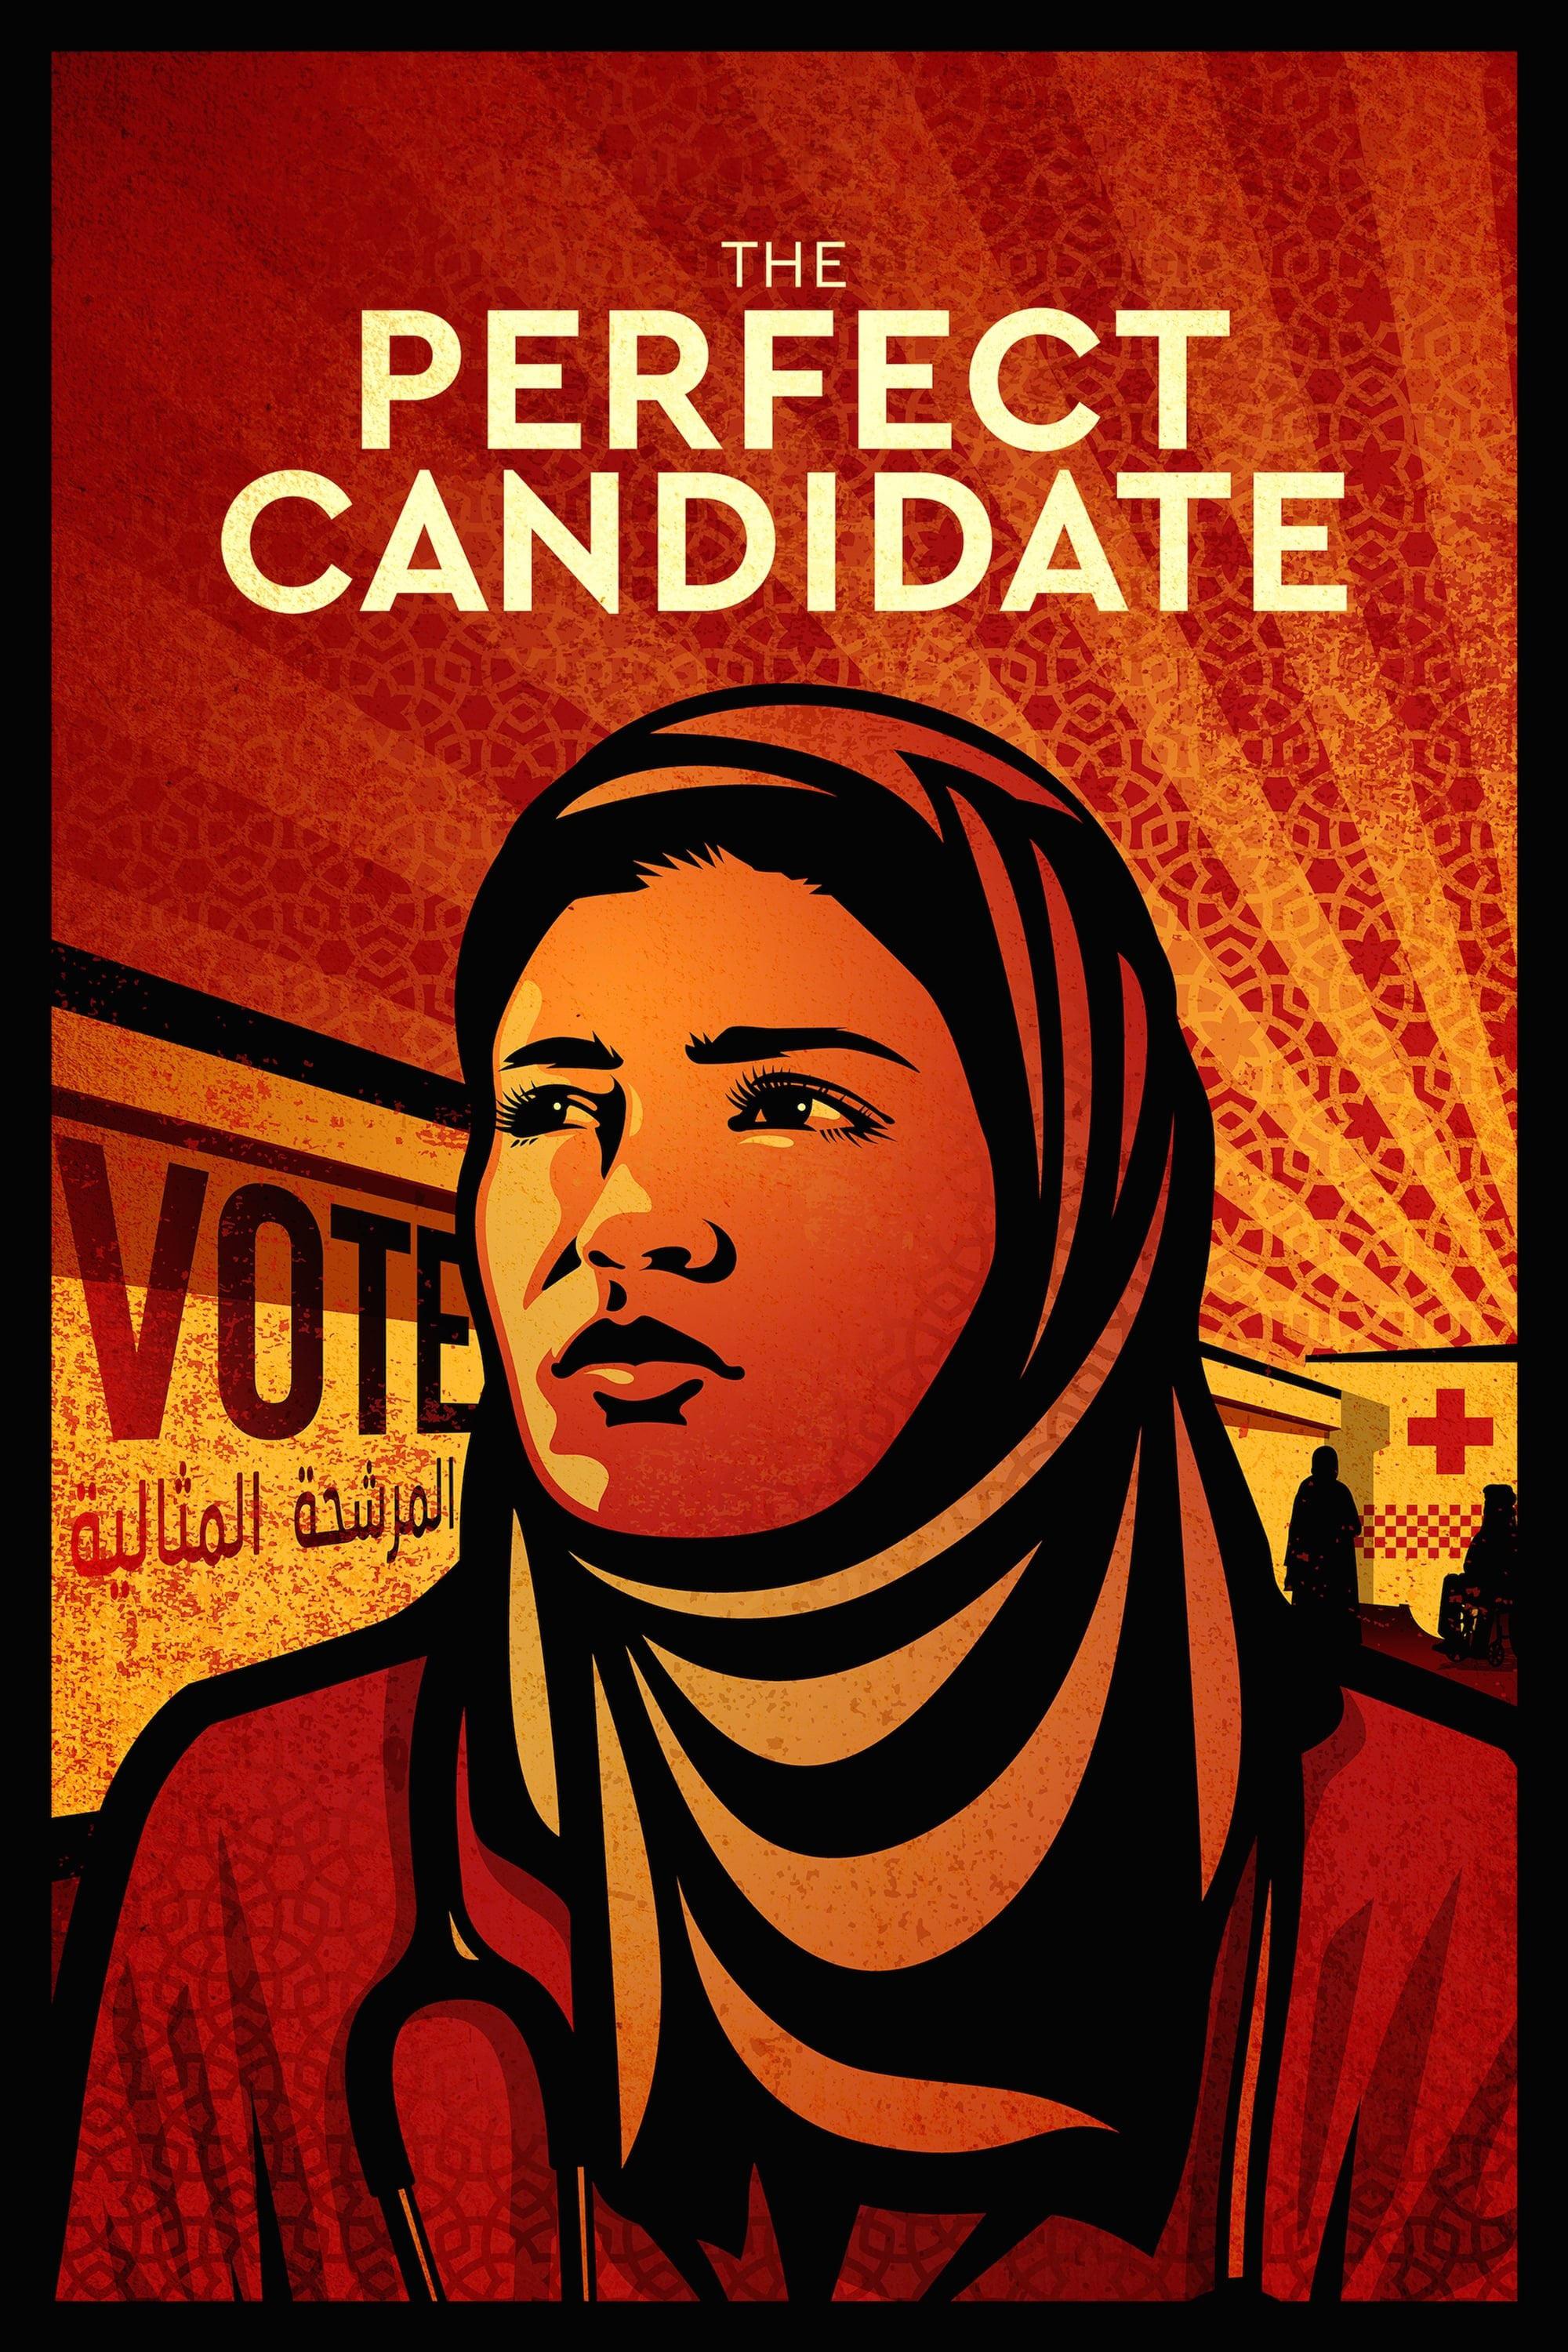 The Perfect Candidate poster